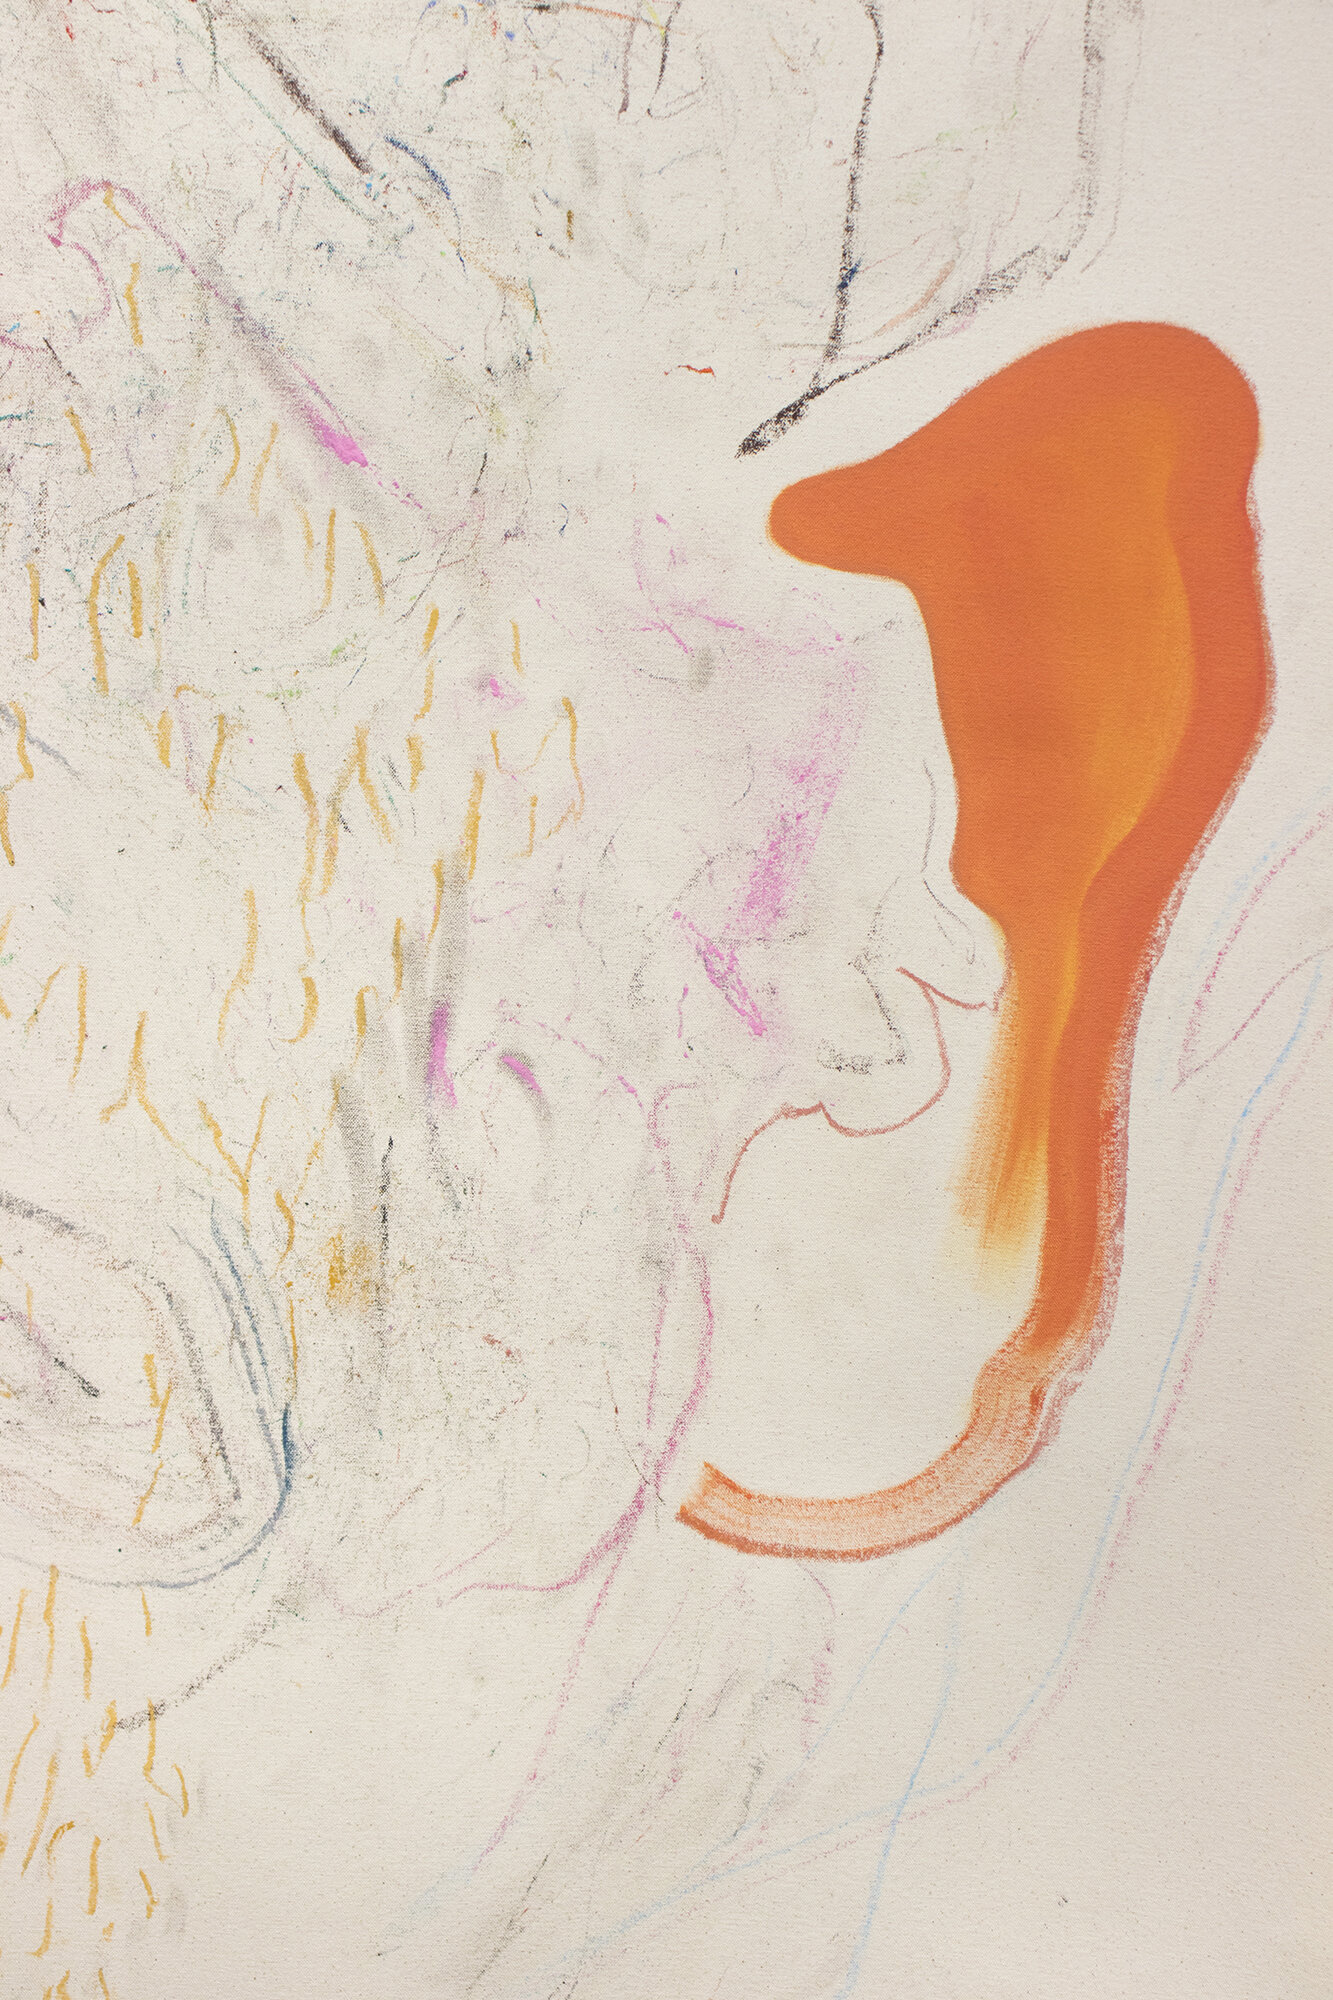  August Vollbrecht  Babyfood , 2019 (detail) oil, graphite, drawing media, rabbit skin glue on unstretched canvas 52 x 47 inches (132 x 119 cm) (AV60) 